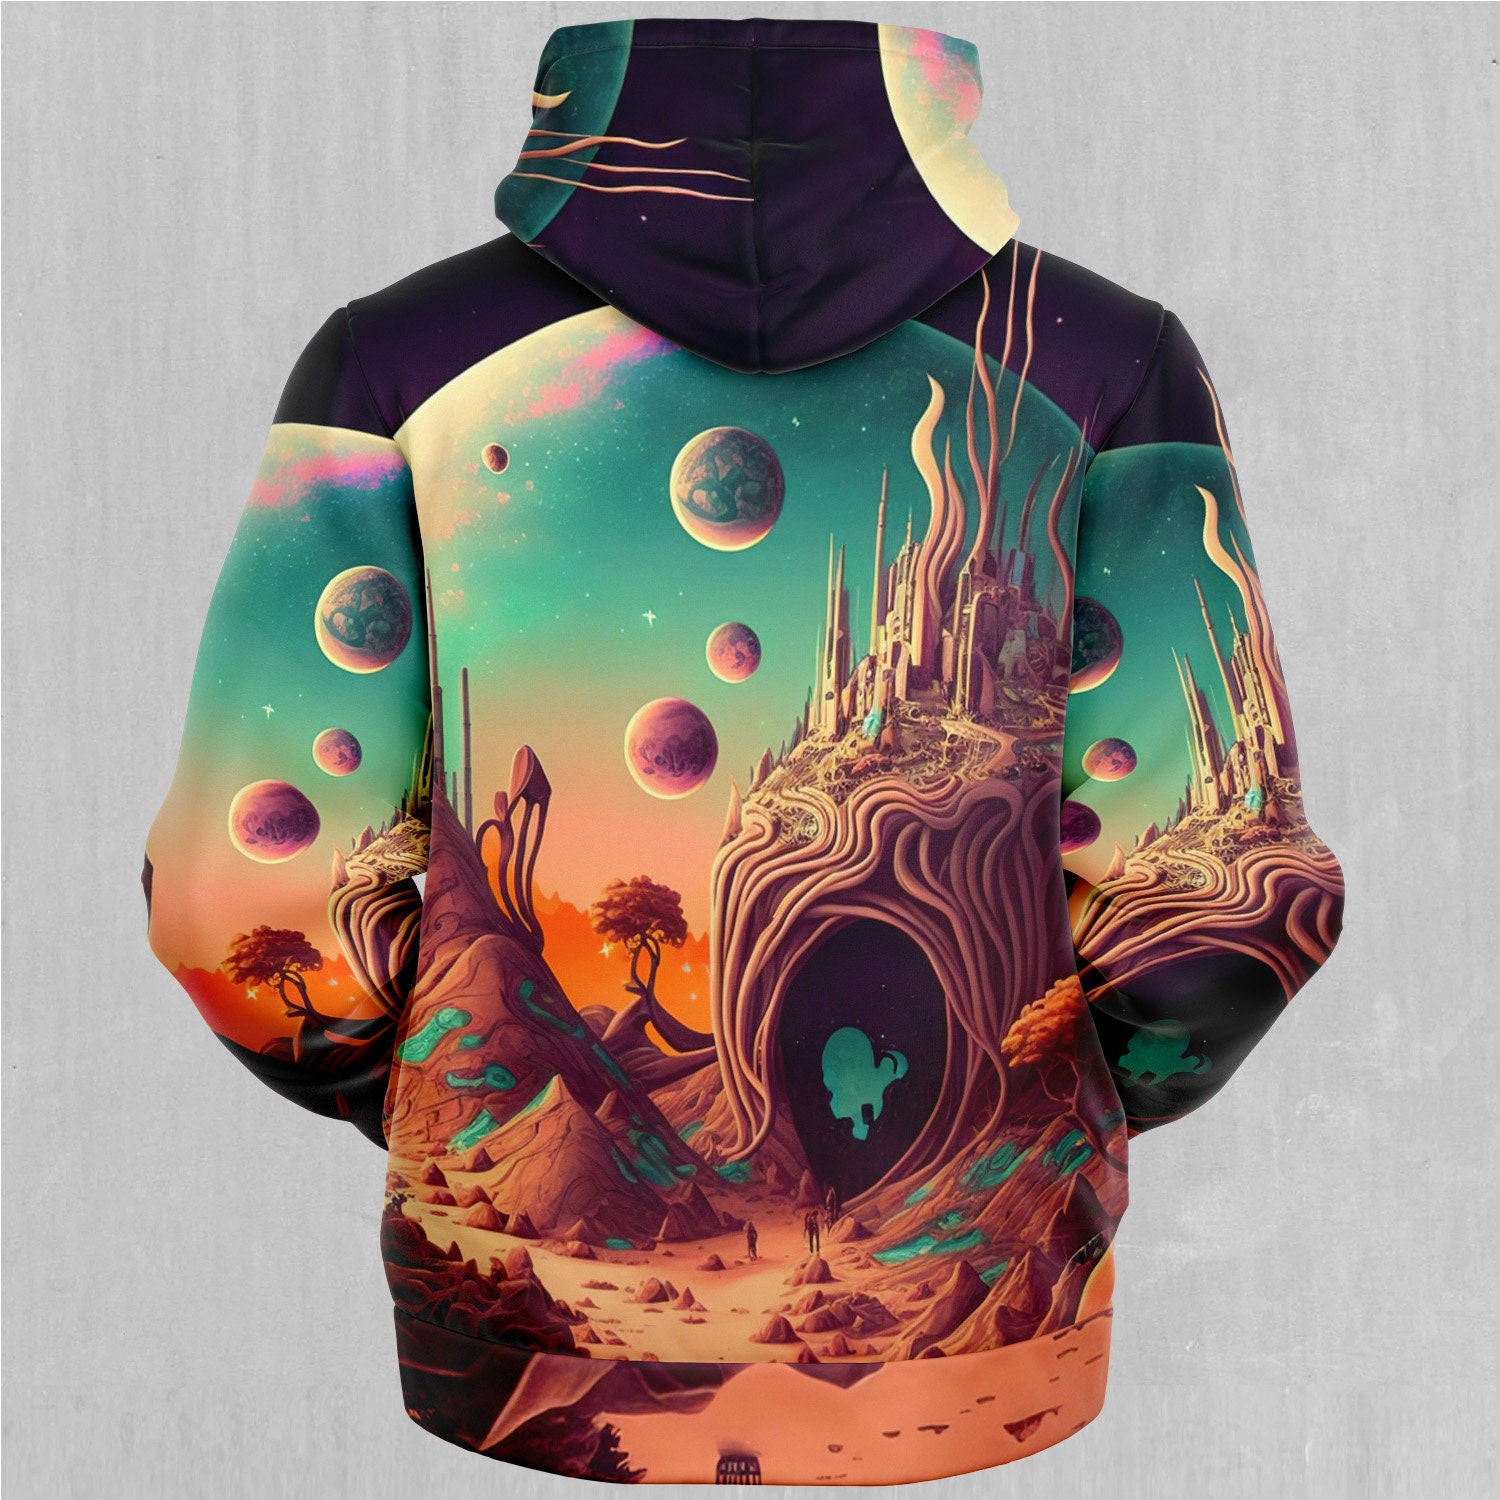 Discover Cosmic Mirage Psychedelic Abstract Trippy Sherpa Microfleece Zip-Up Hoodie